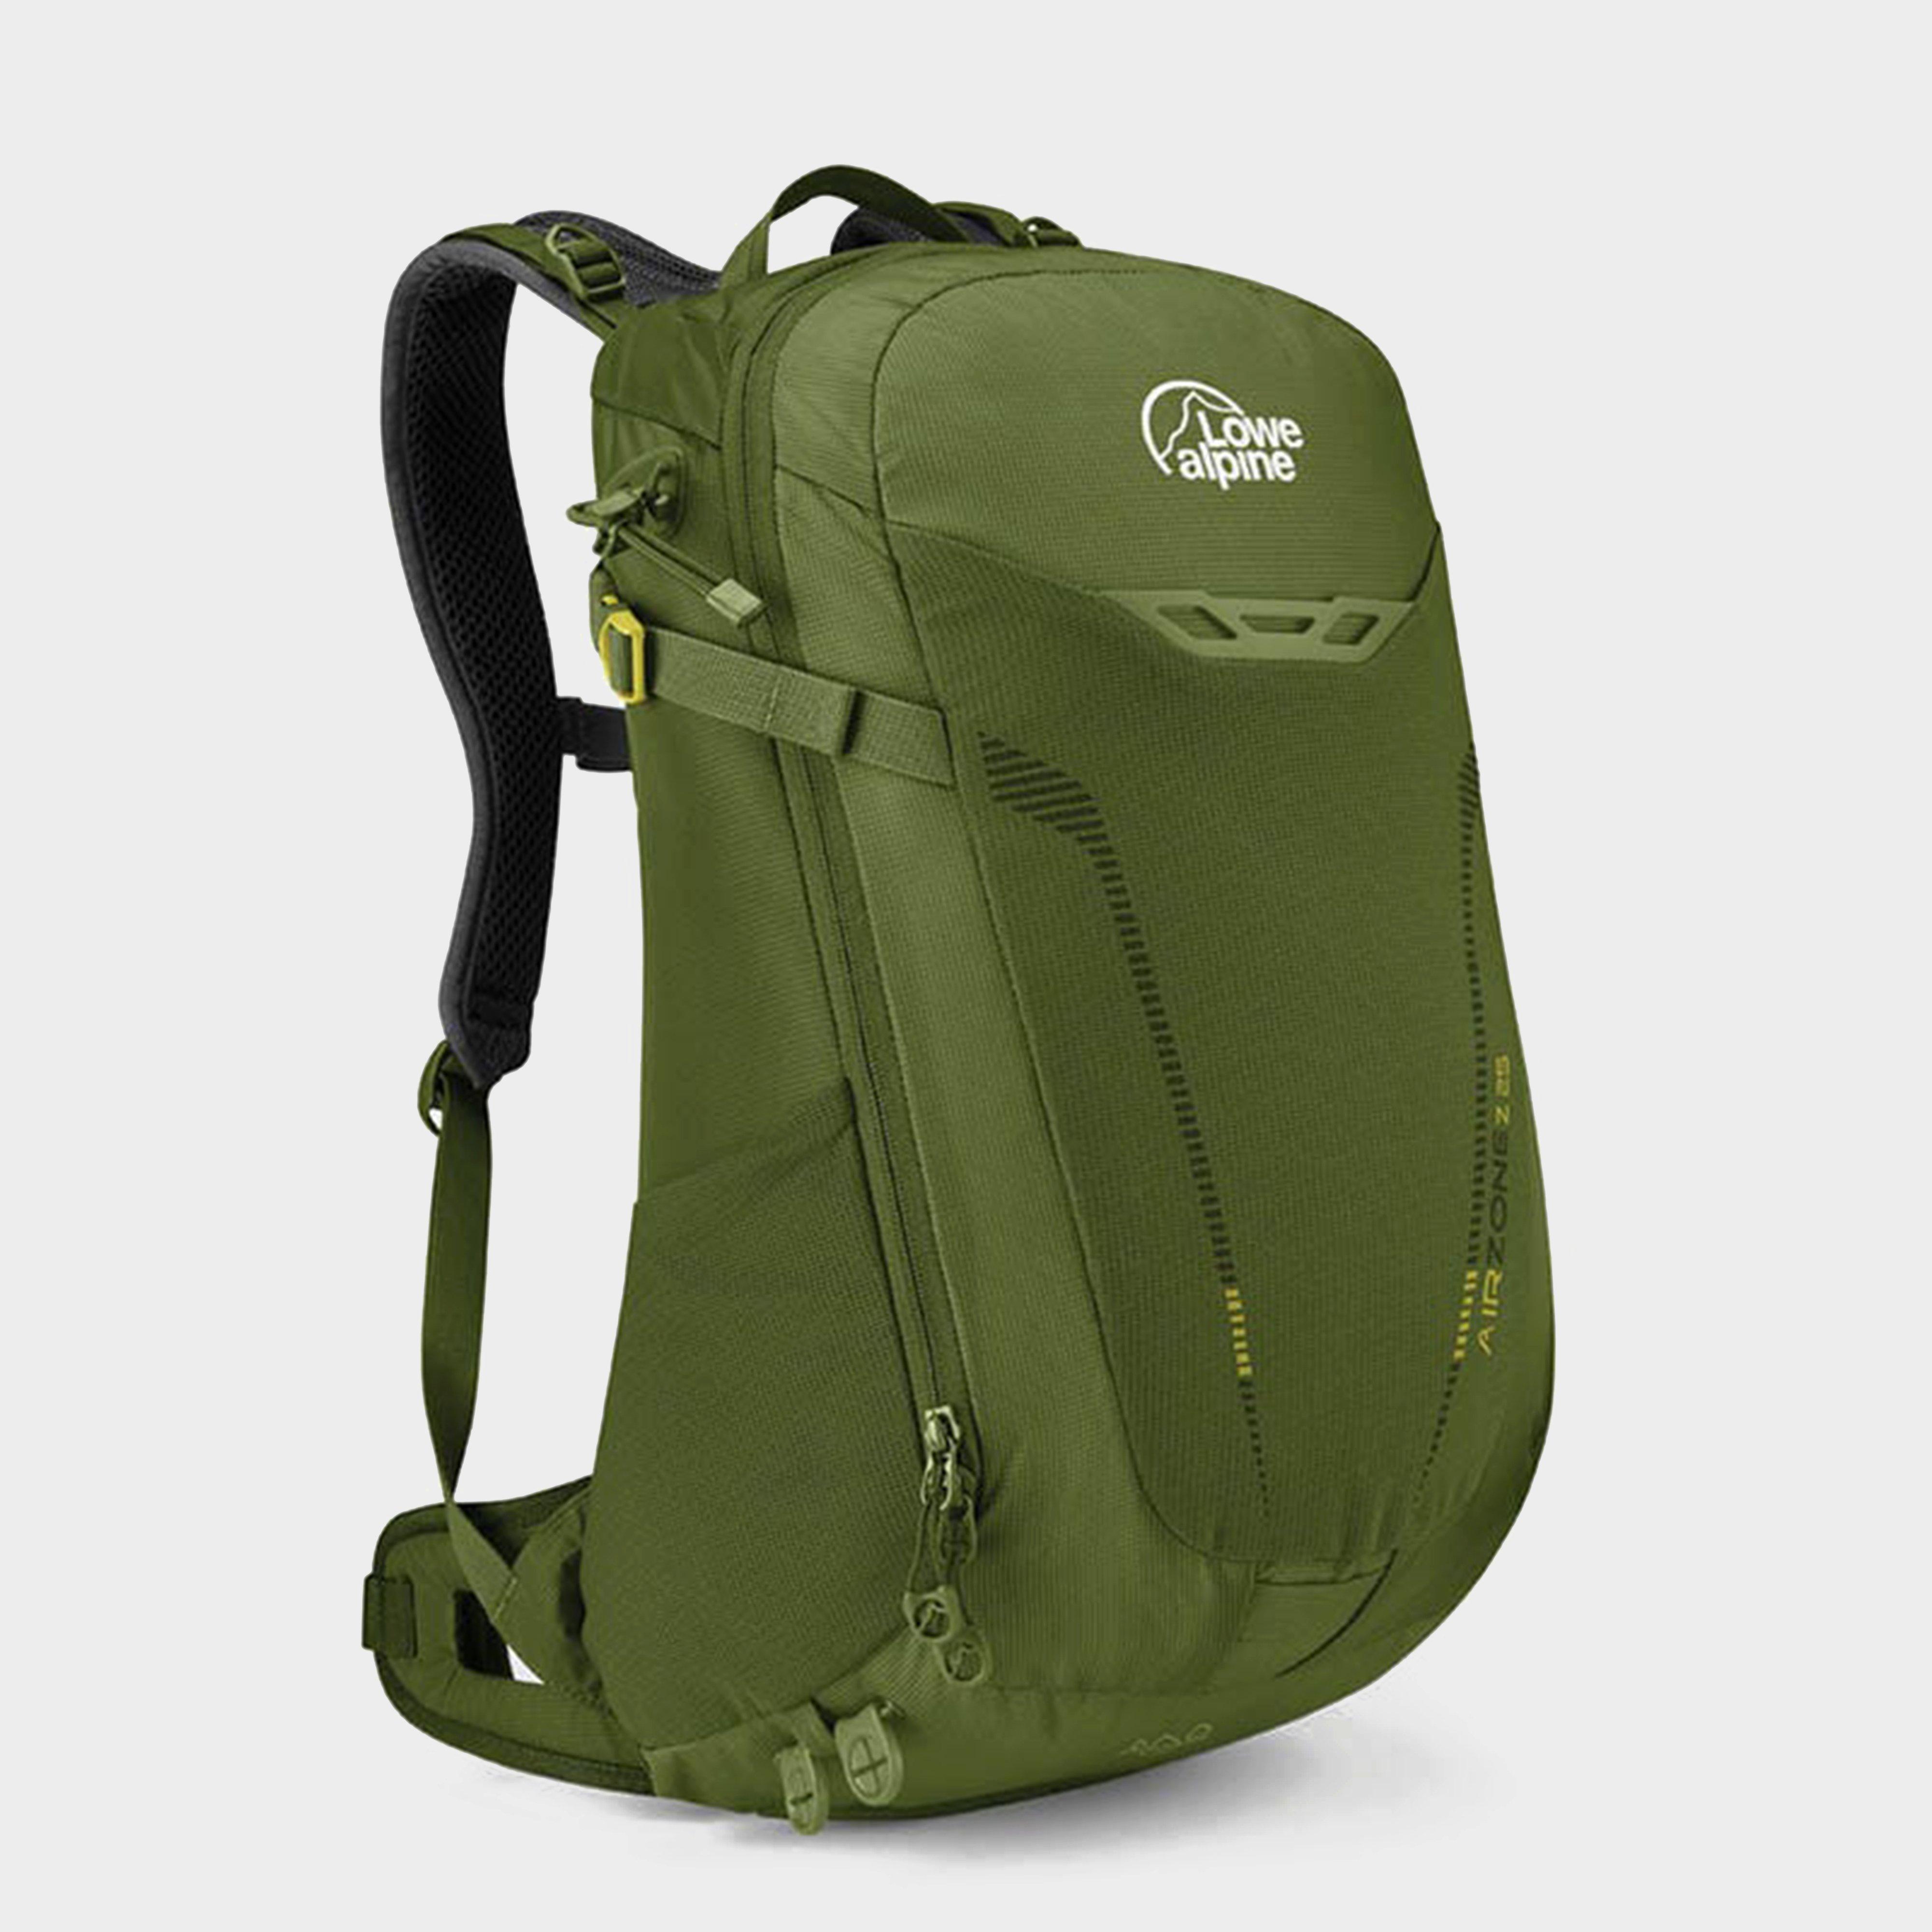 Lowe Alpine Airzone 18 Litre Daysack  Green